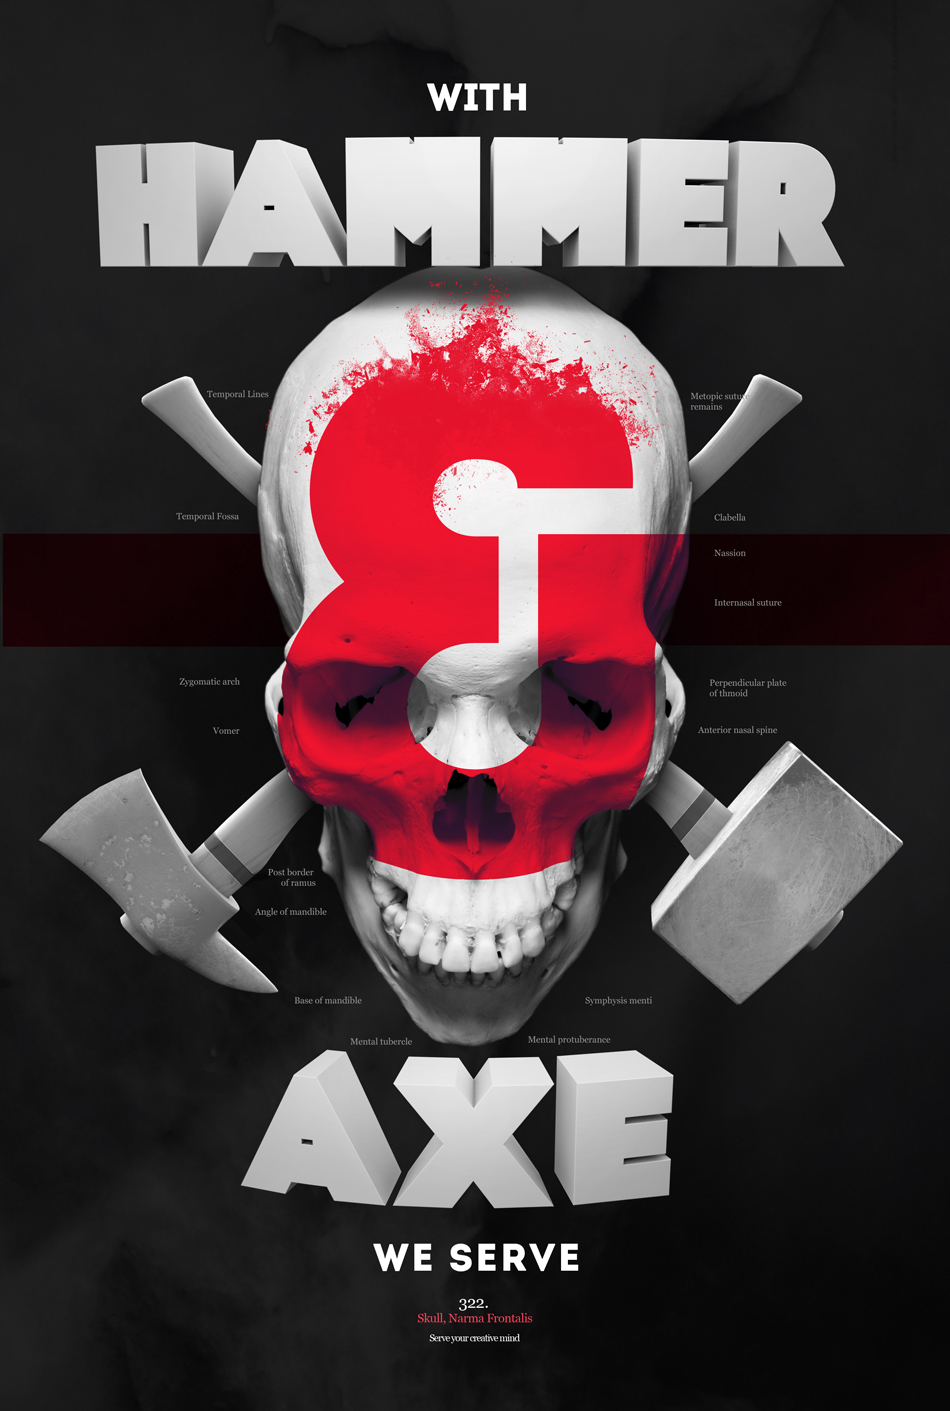 Narma font skull survival hair Layout bone red type axe hammer Serve craft black and white